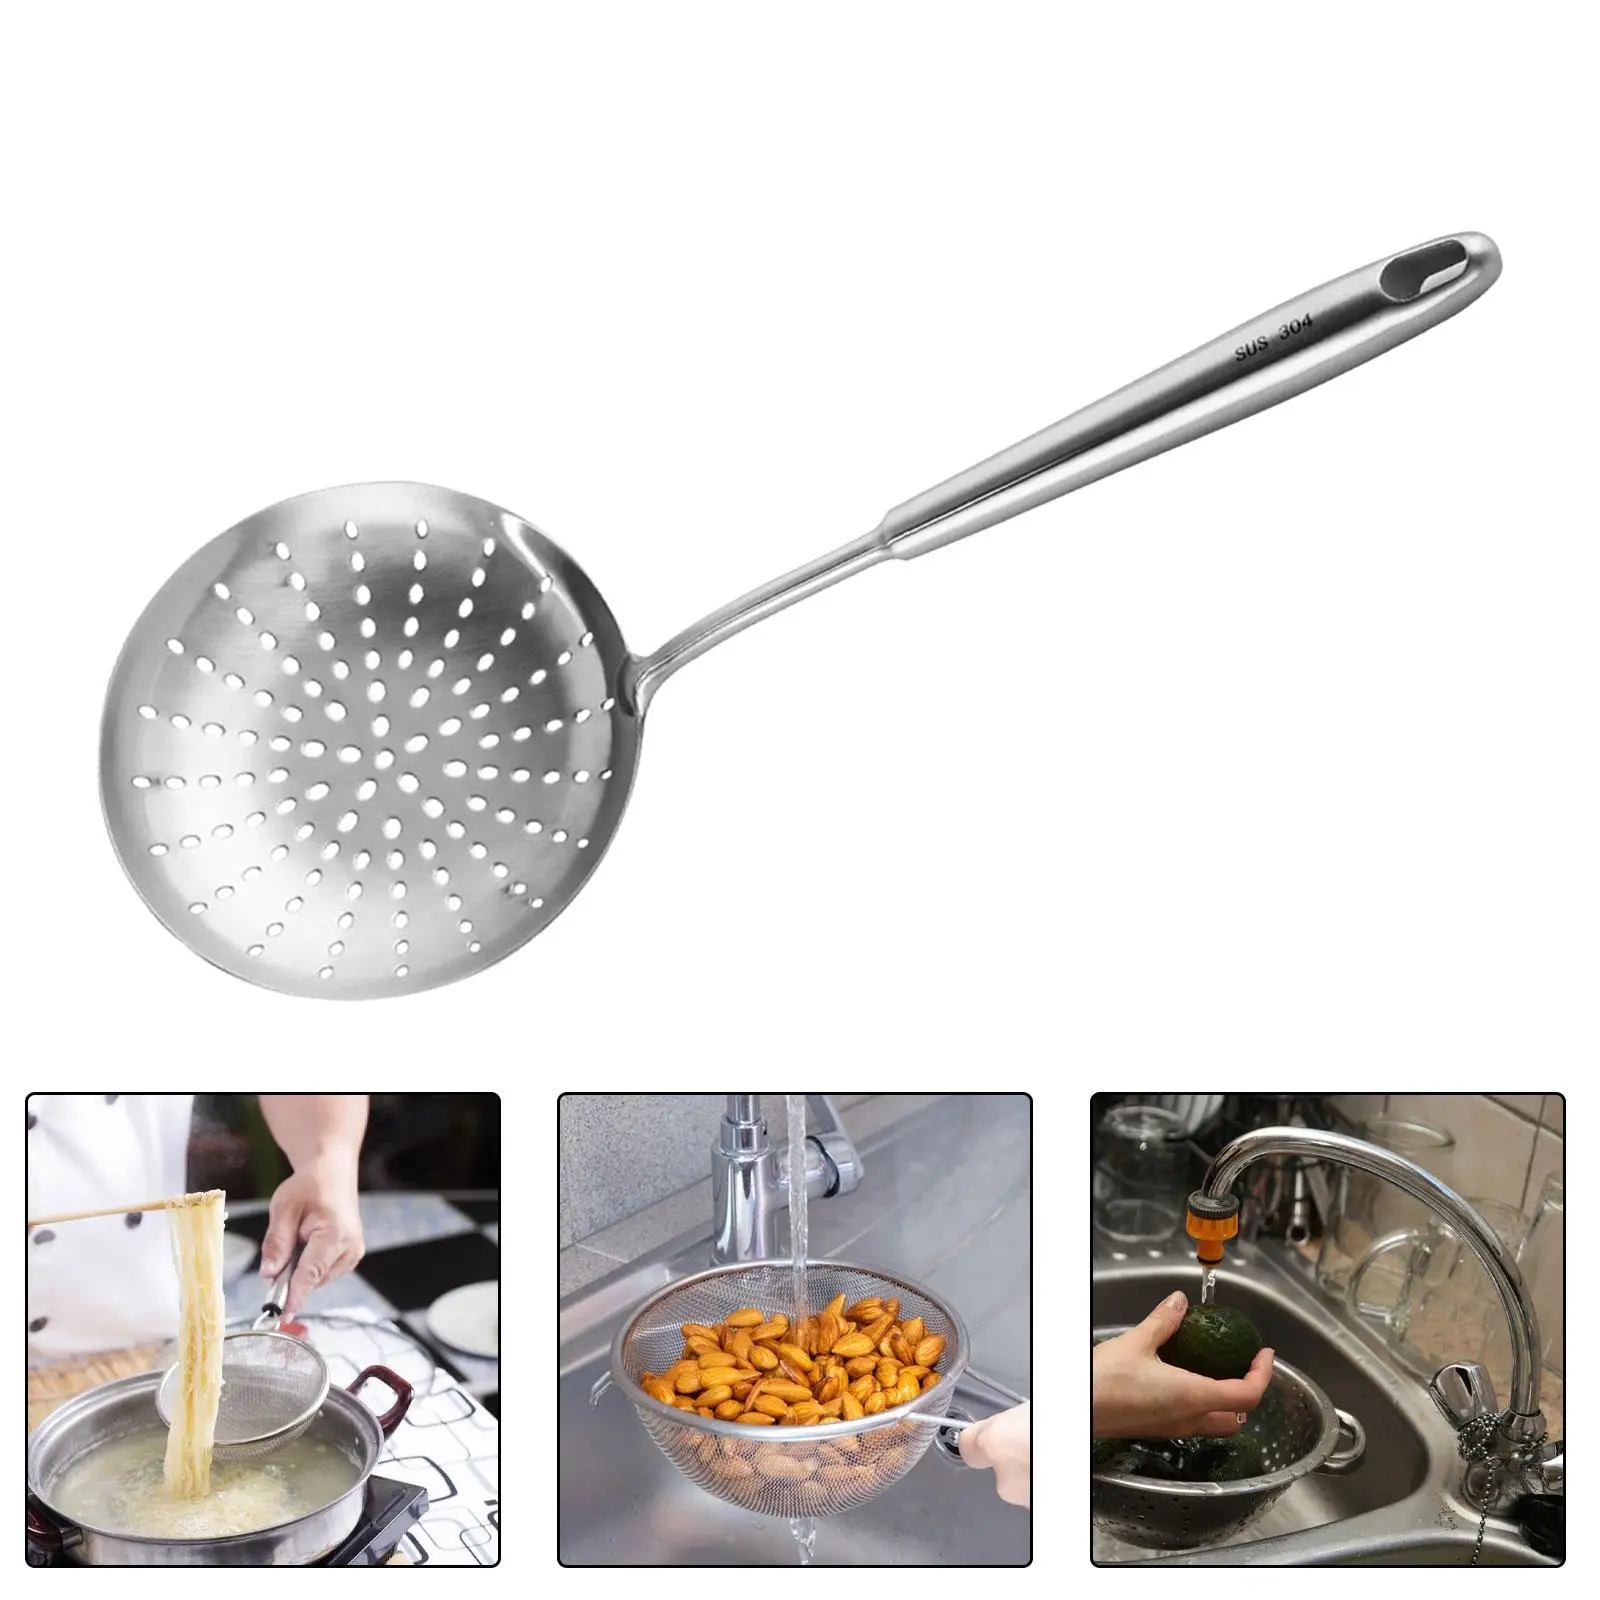 Stainless Steel Skimmer Slotted Spoon Multifunctional Cooking Colander Spoon for Draining Frying Noodles Pasta Scooping 15.9cm